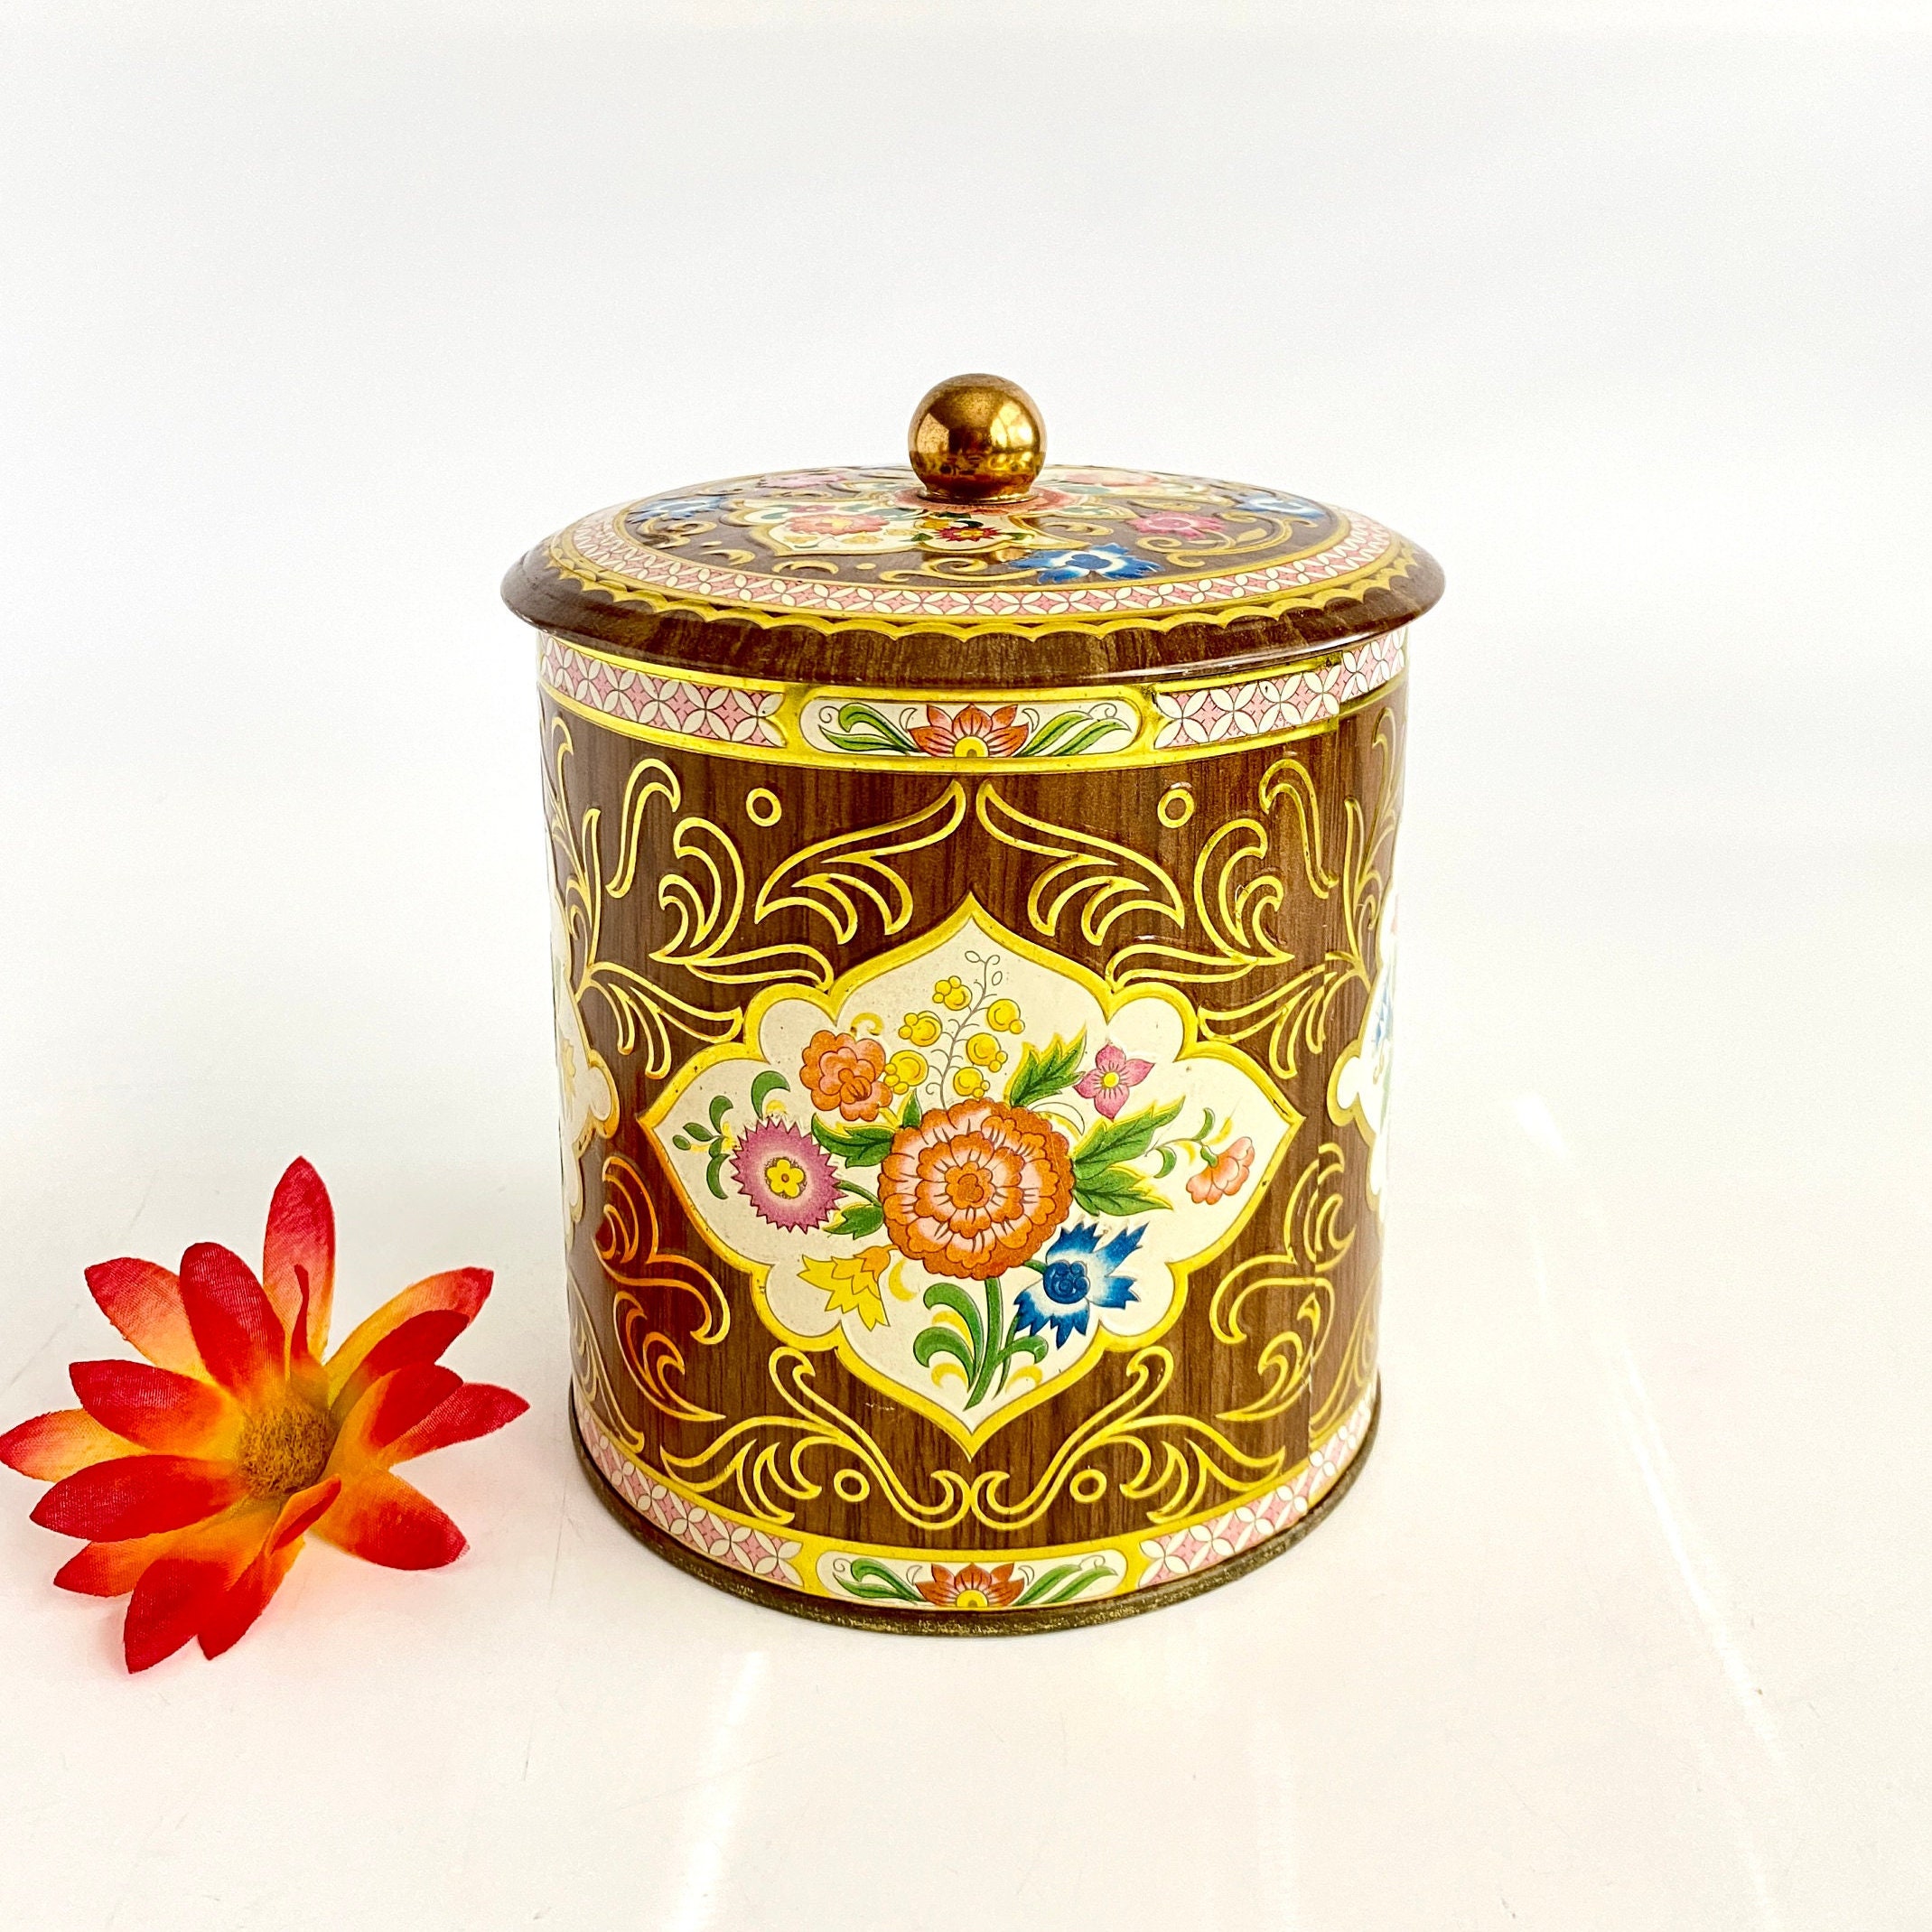 Beautiful Gold Detailed Flowers And Birds Design Made In England Vintage Design By Daher Round Lidded Box Tin